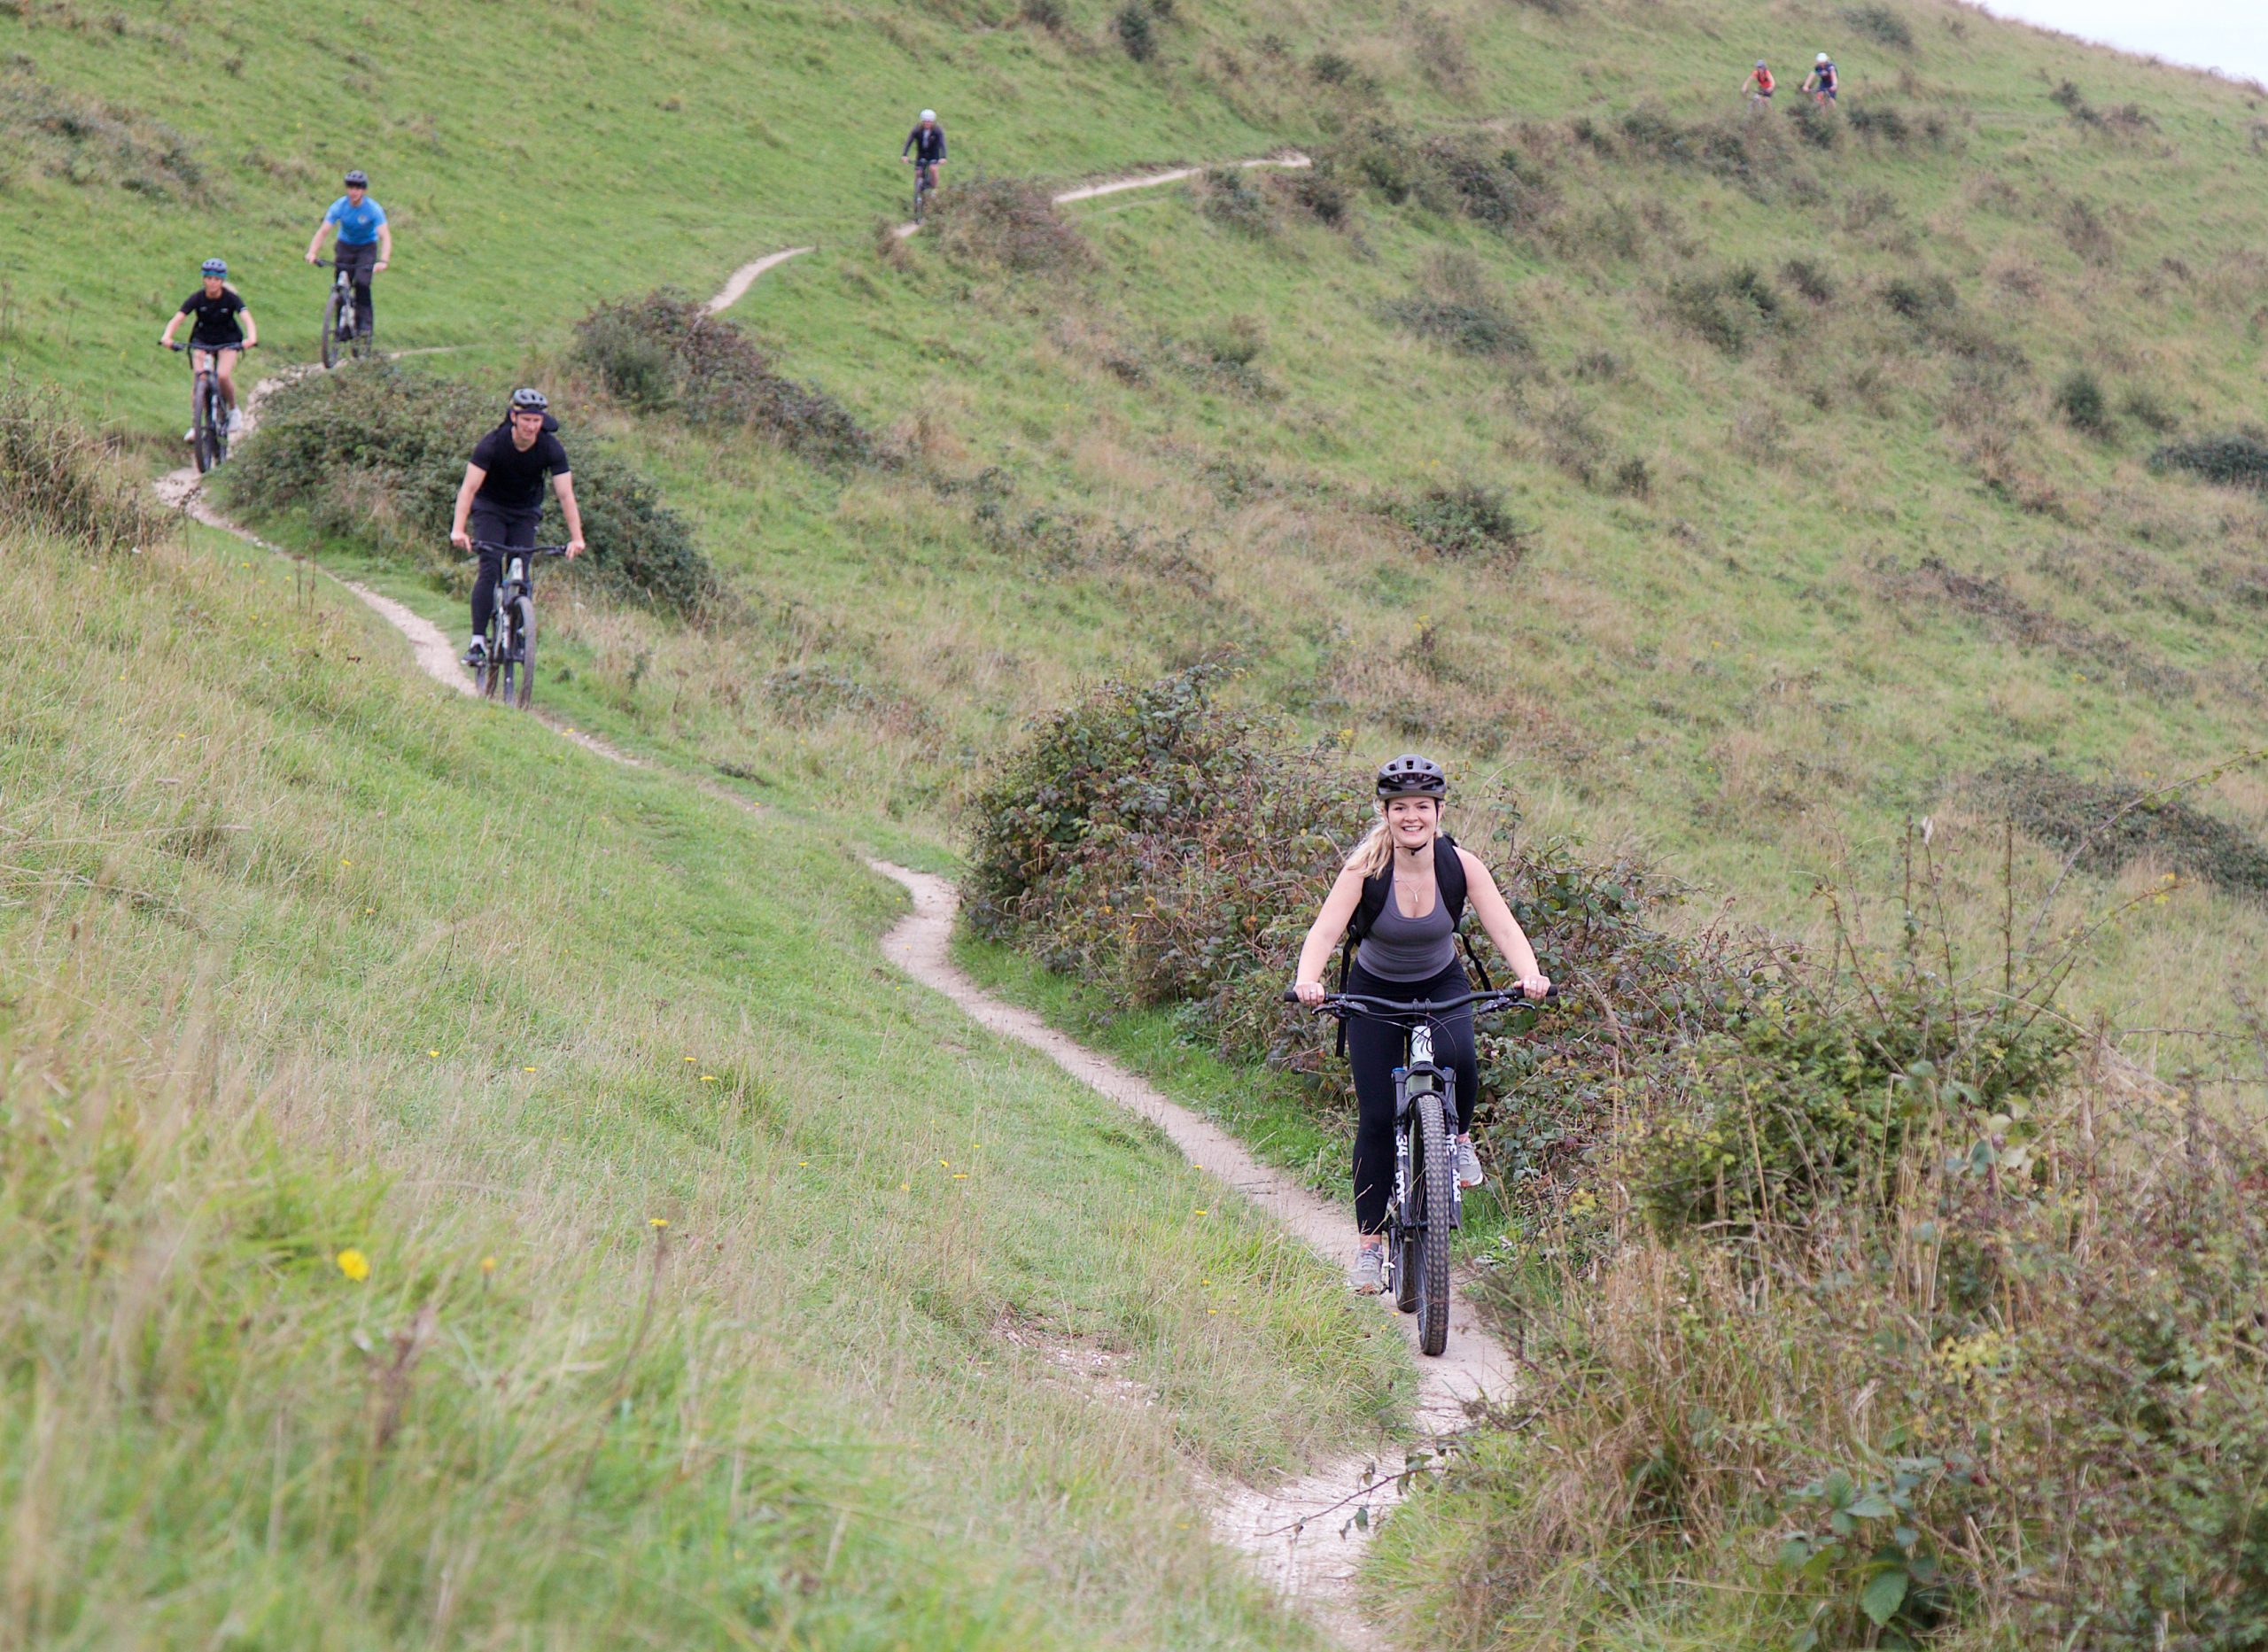 Marmalade and Wiston Estate, Ride and dine on the south downs national park